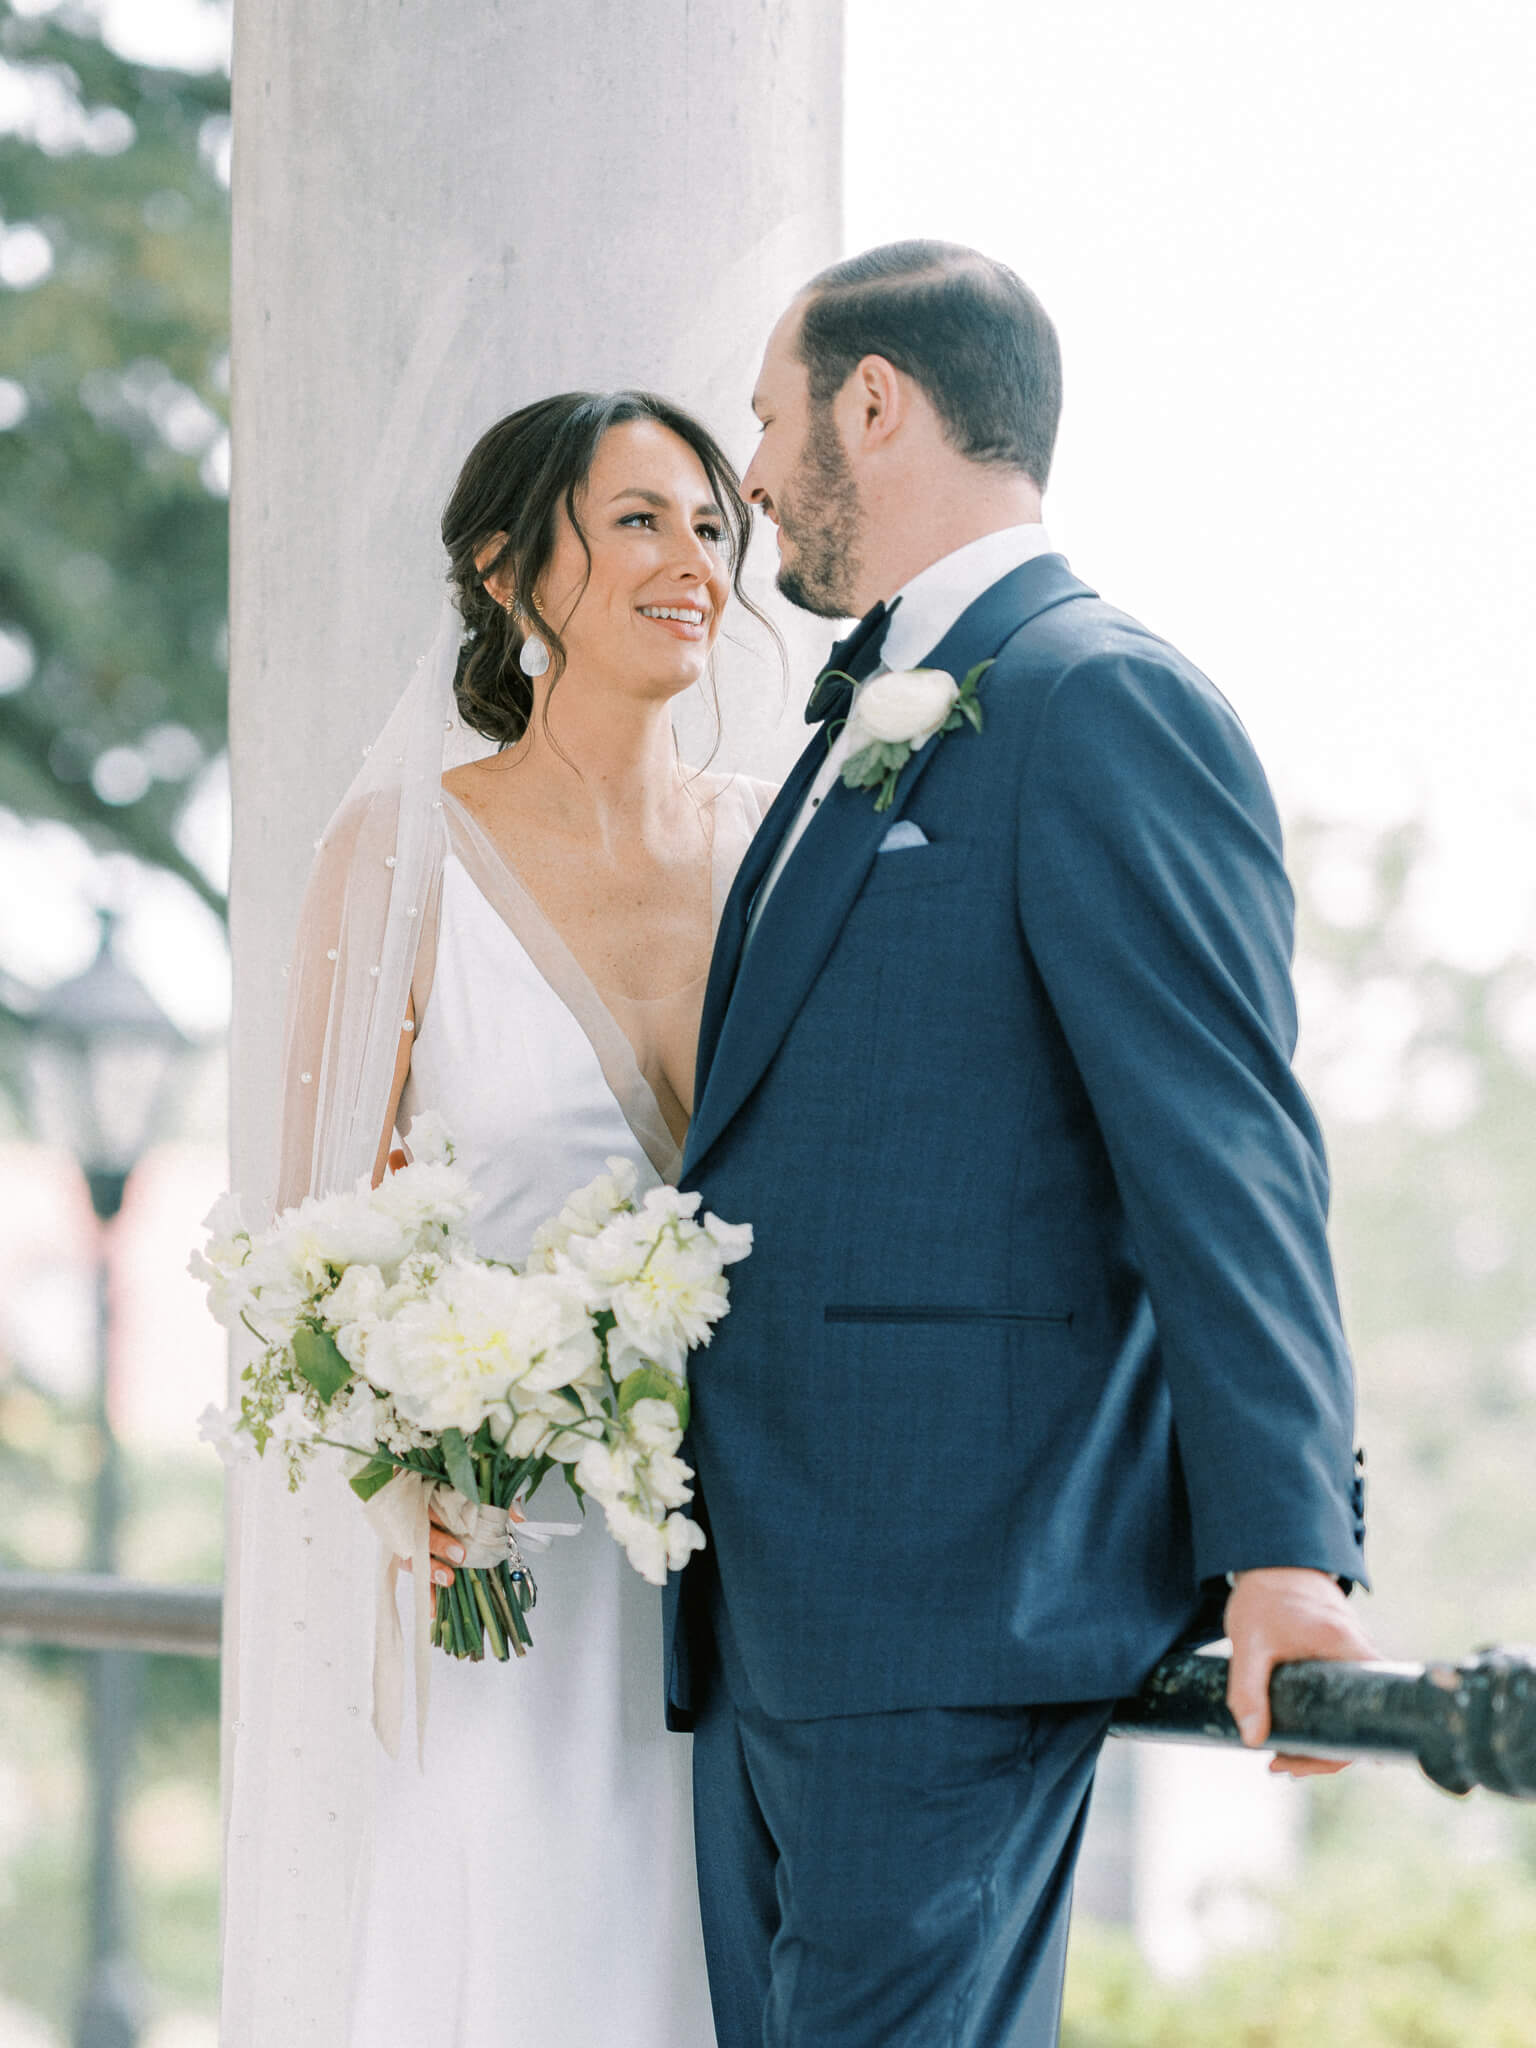 Bride holding her bouquet and groom in a blue suit close up together leaning against a railing and column